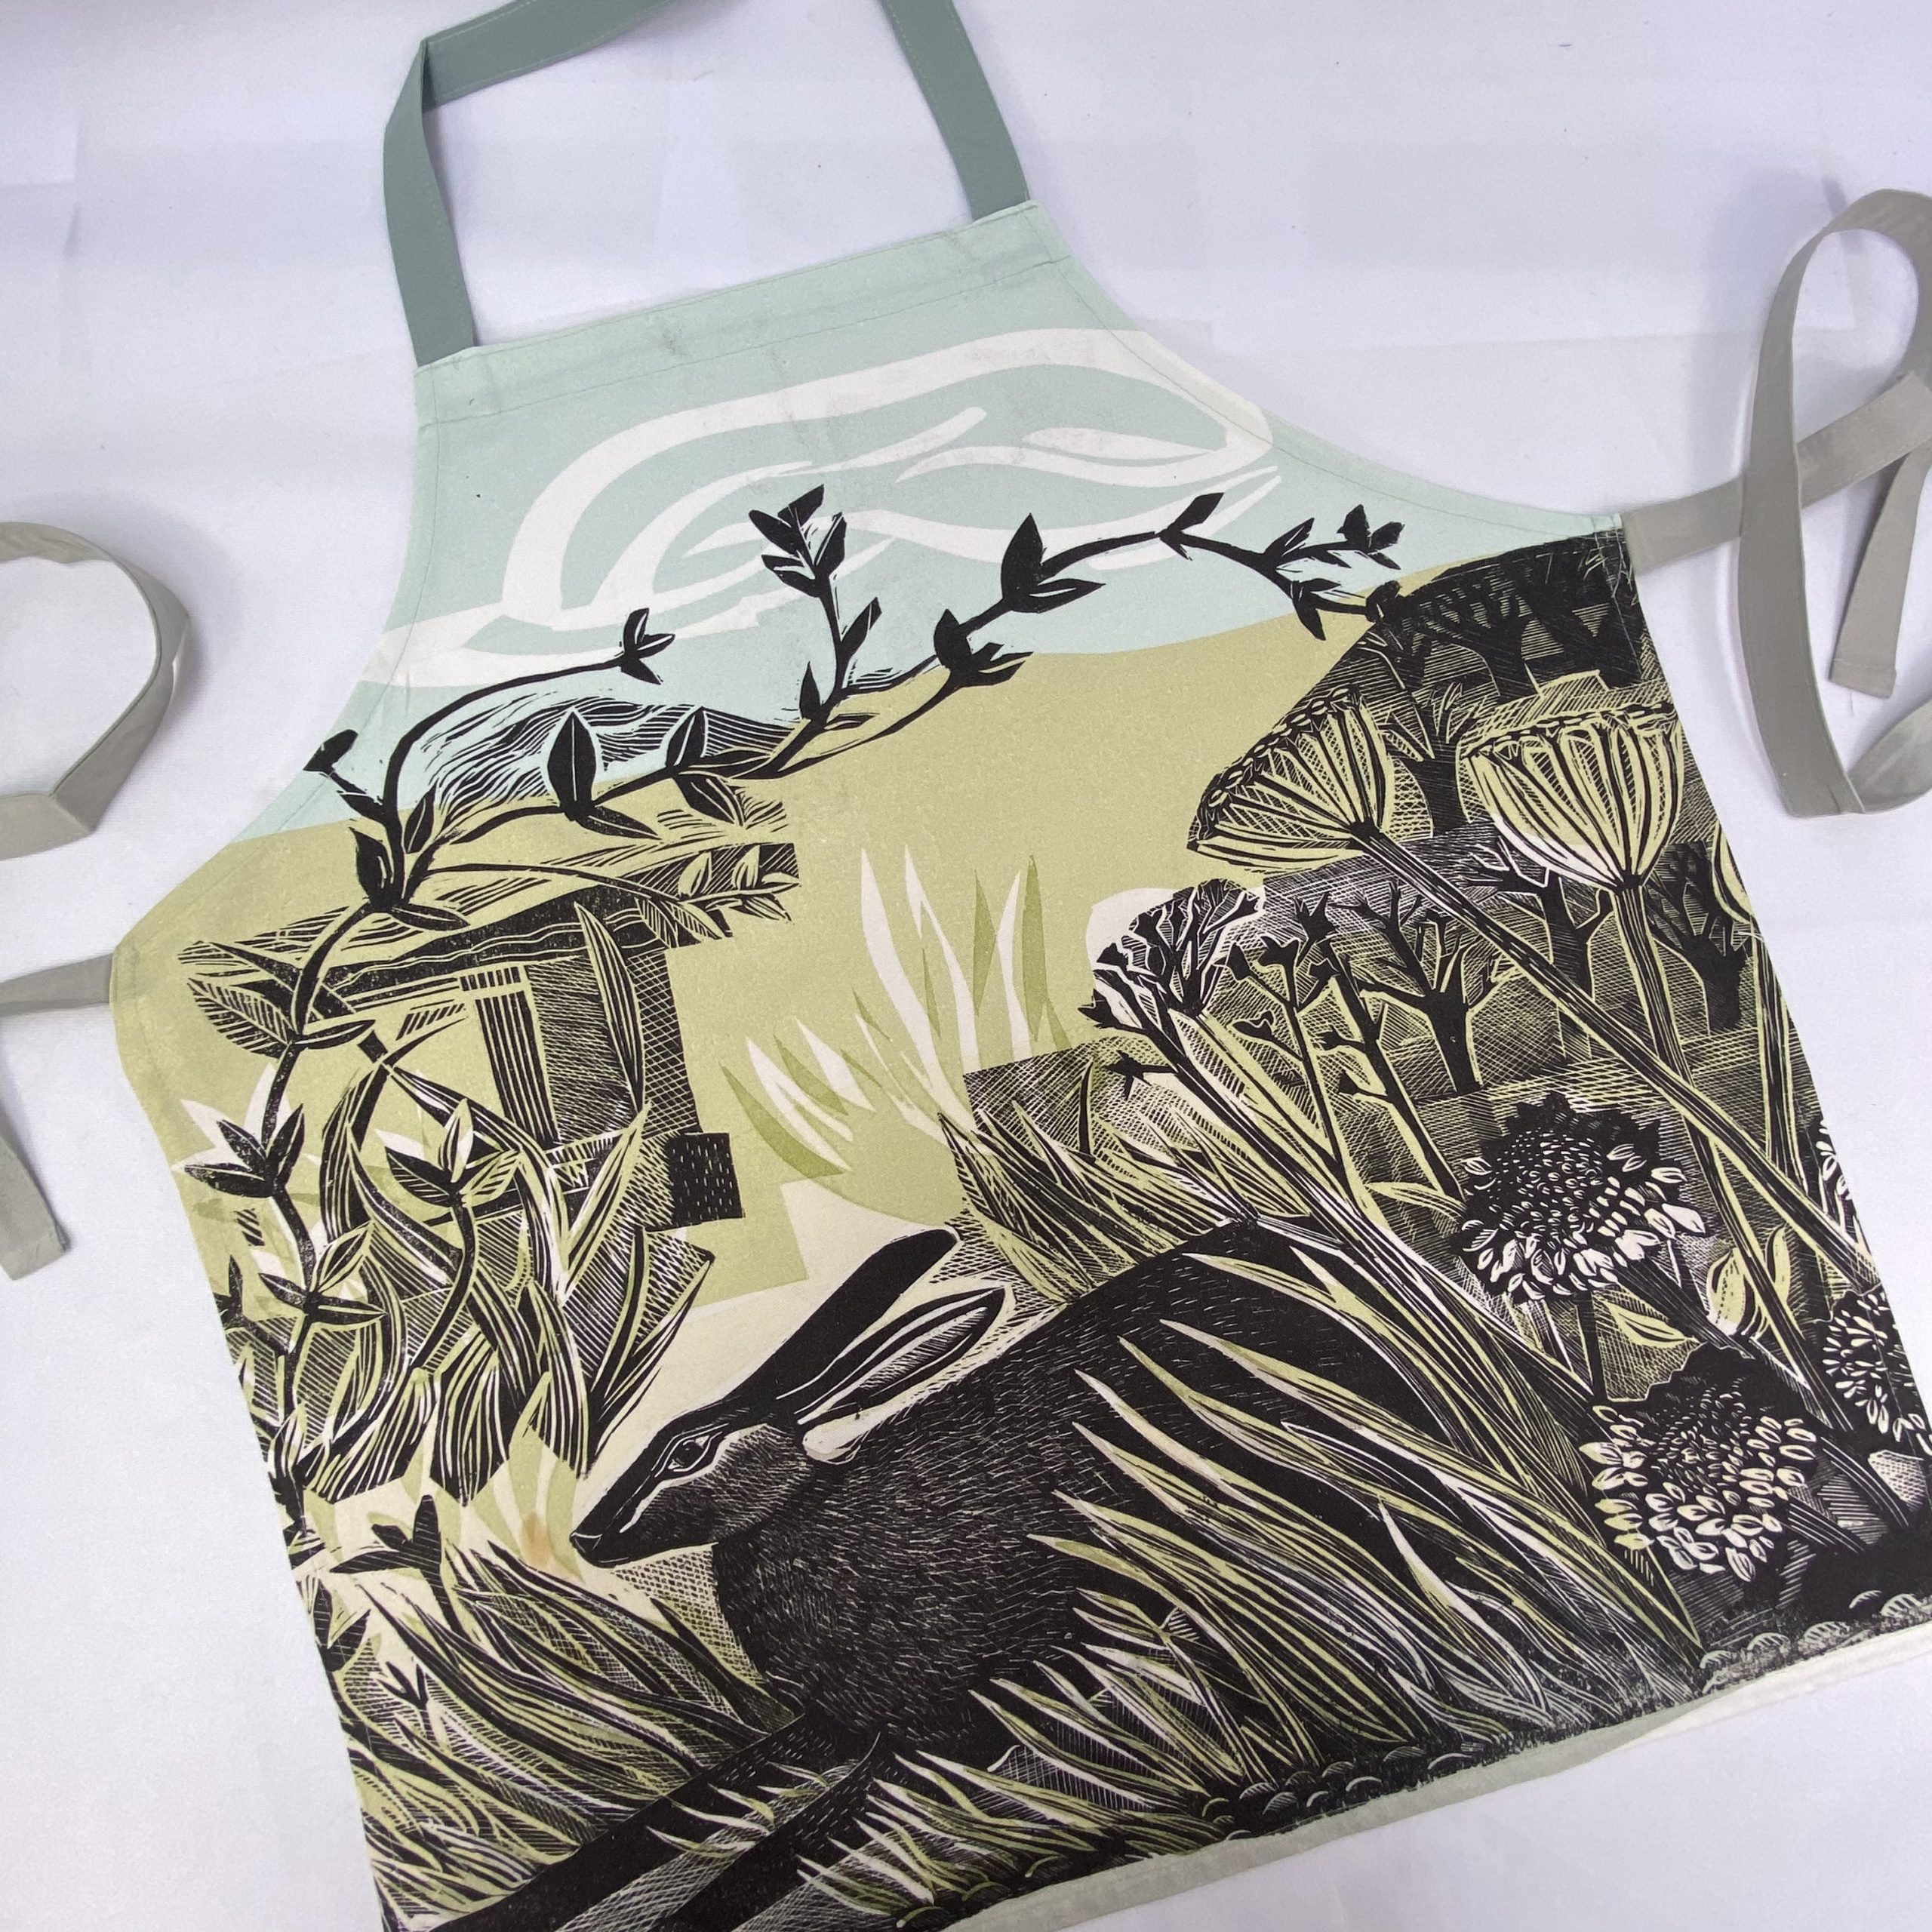 Screen printed textile merchandise including aprons by Paul Bristow